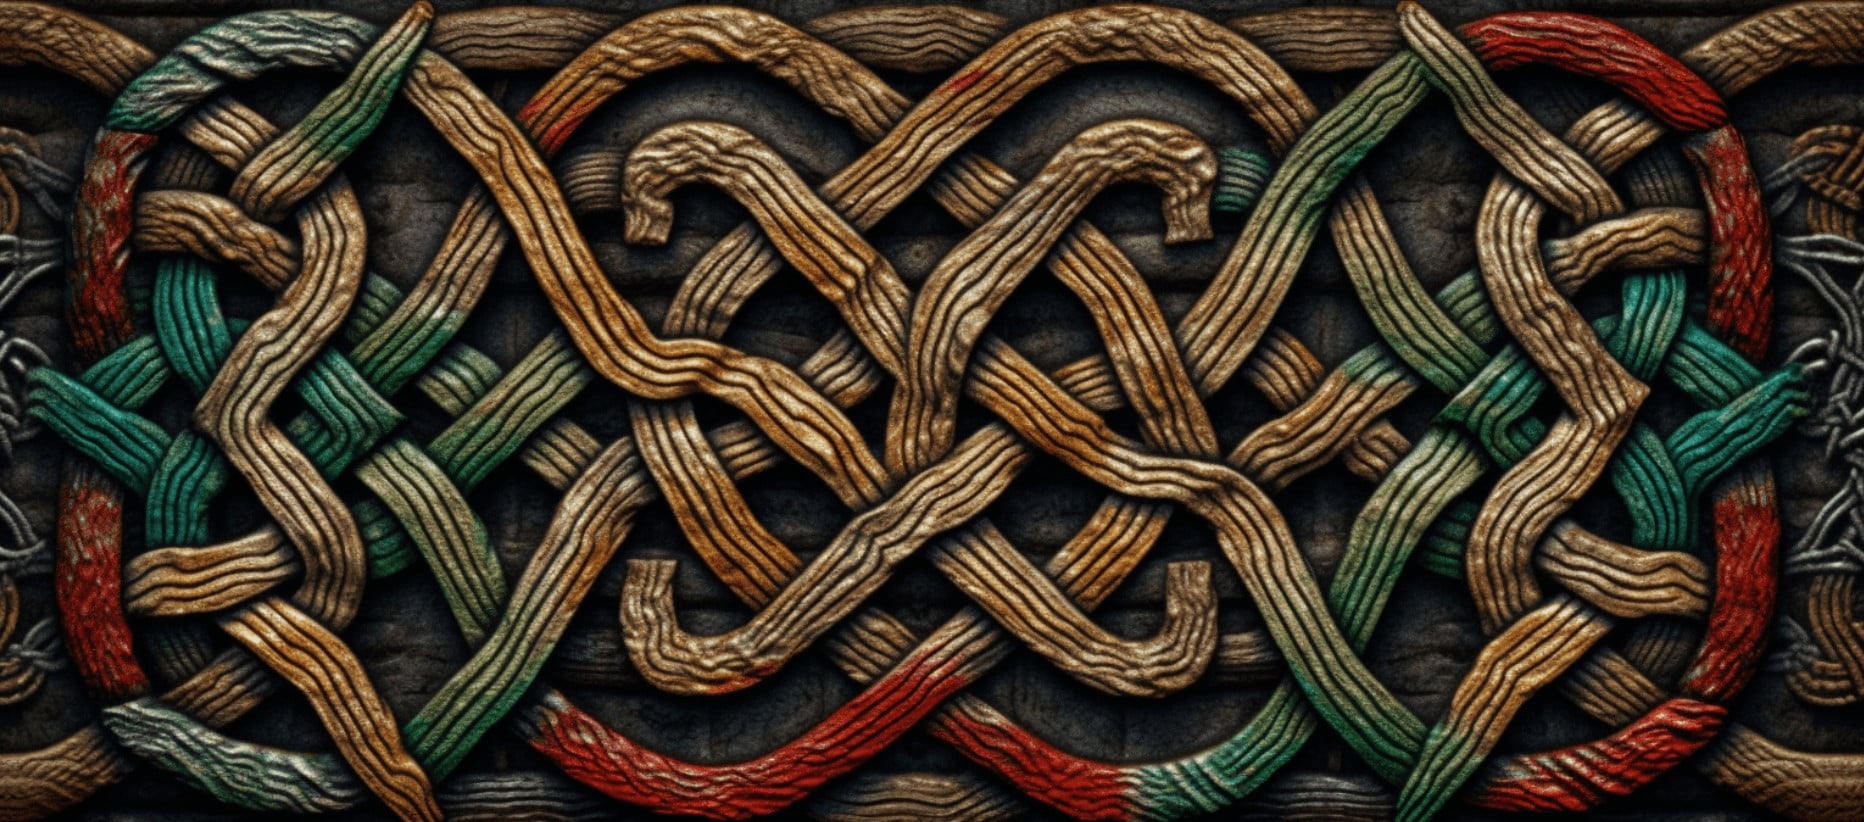 Celtic Knot Wallpaper Images Browse 4314 Stock Photos  Vectors Free  Download with Trial  Shutterstock